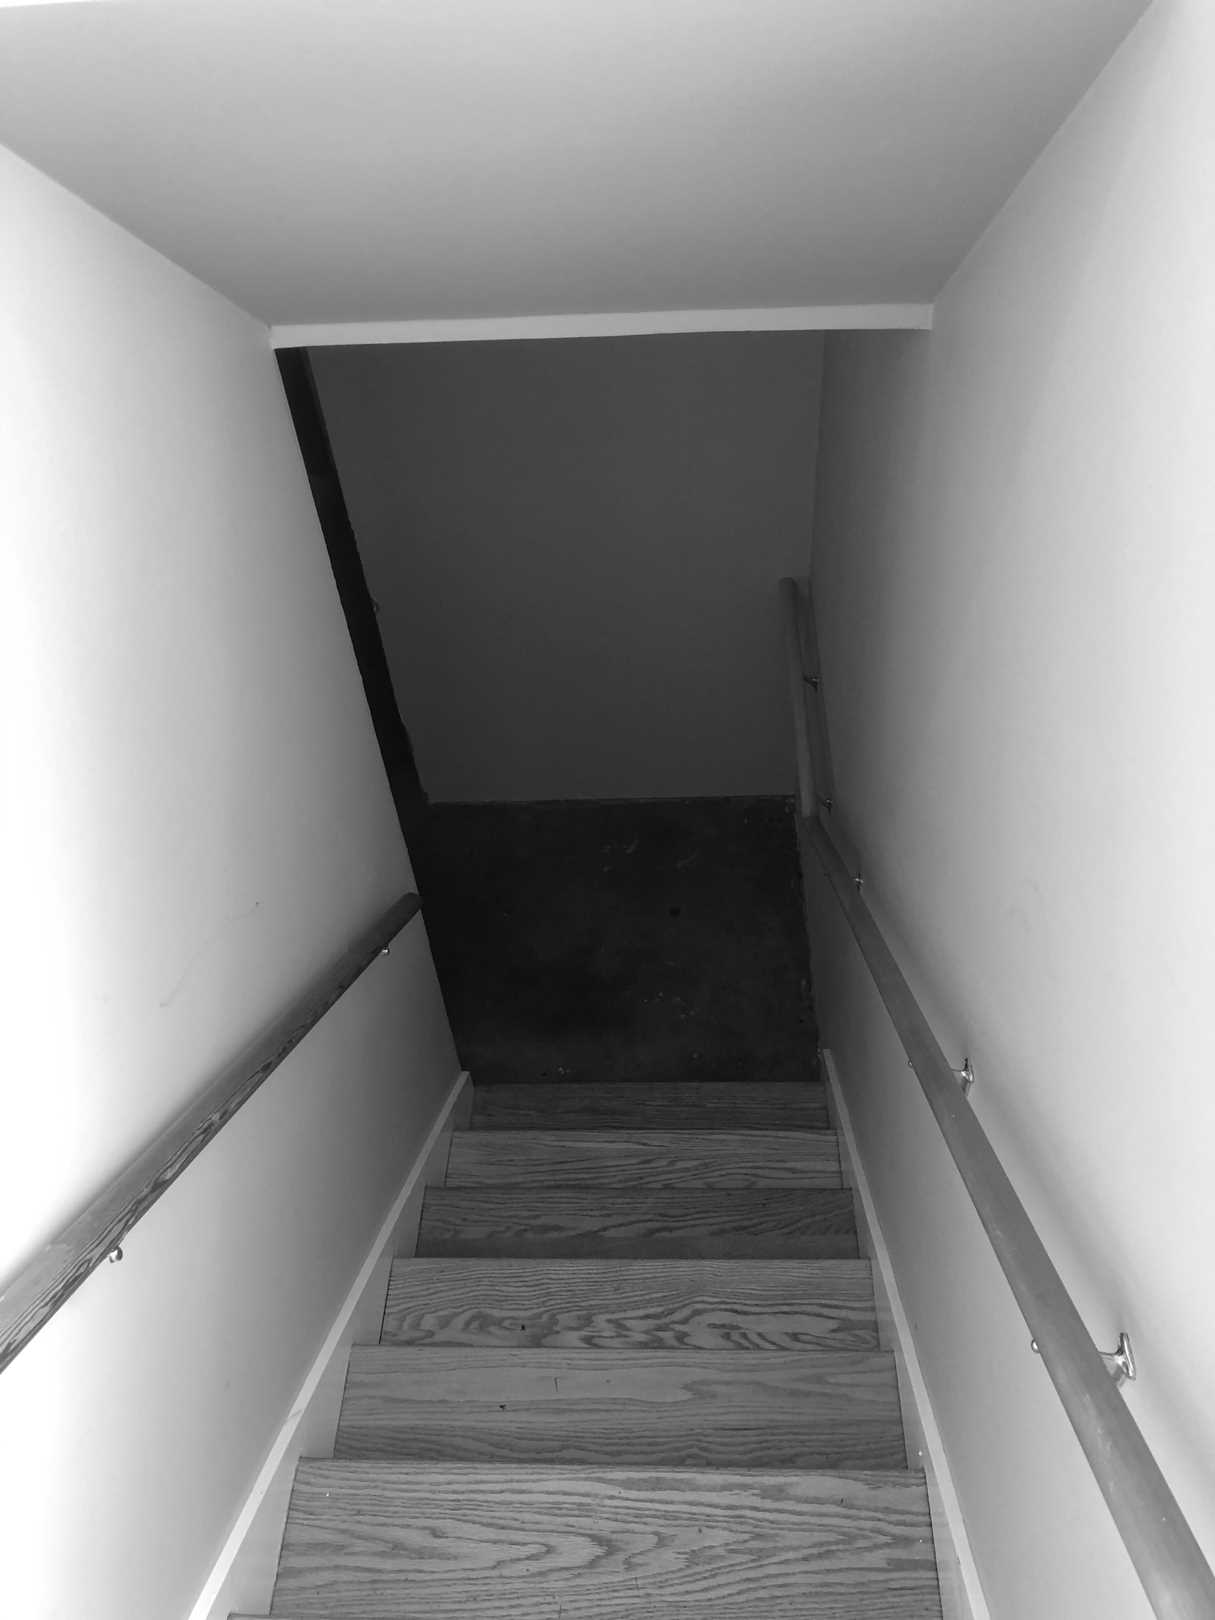 BEFORE - The original basement stairs, located by the front door, had wood treads and matching wood handrails.